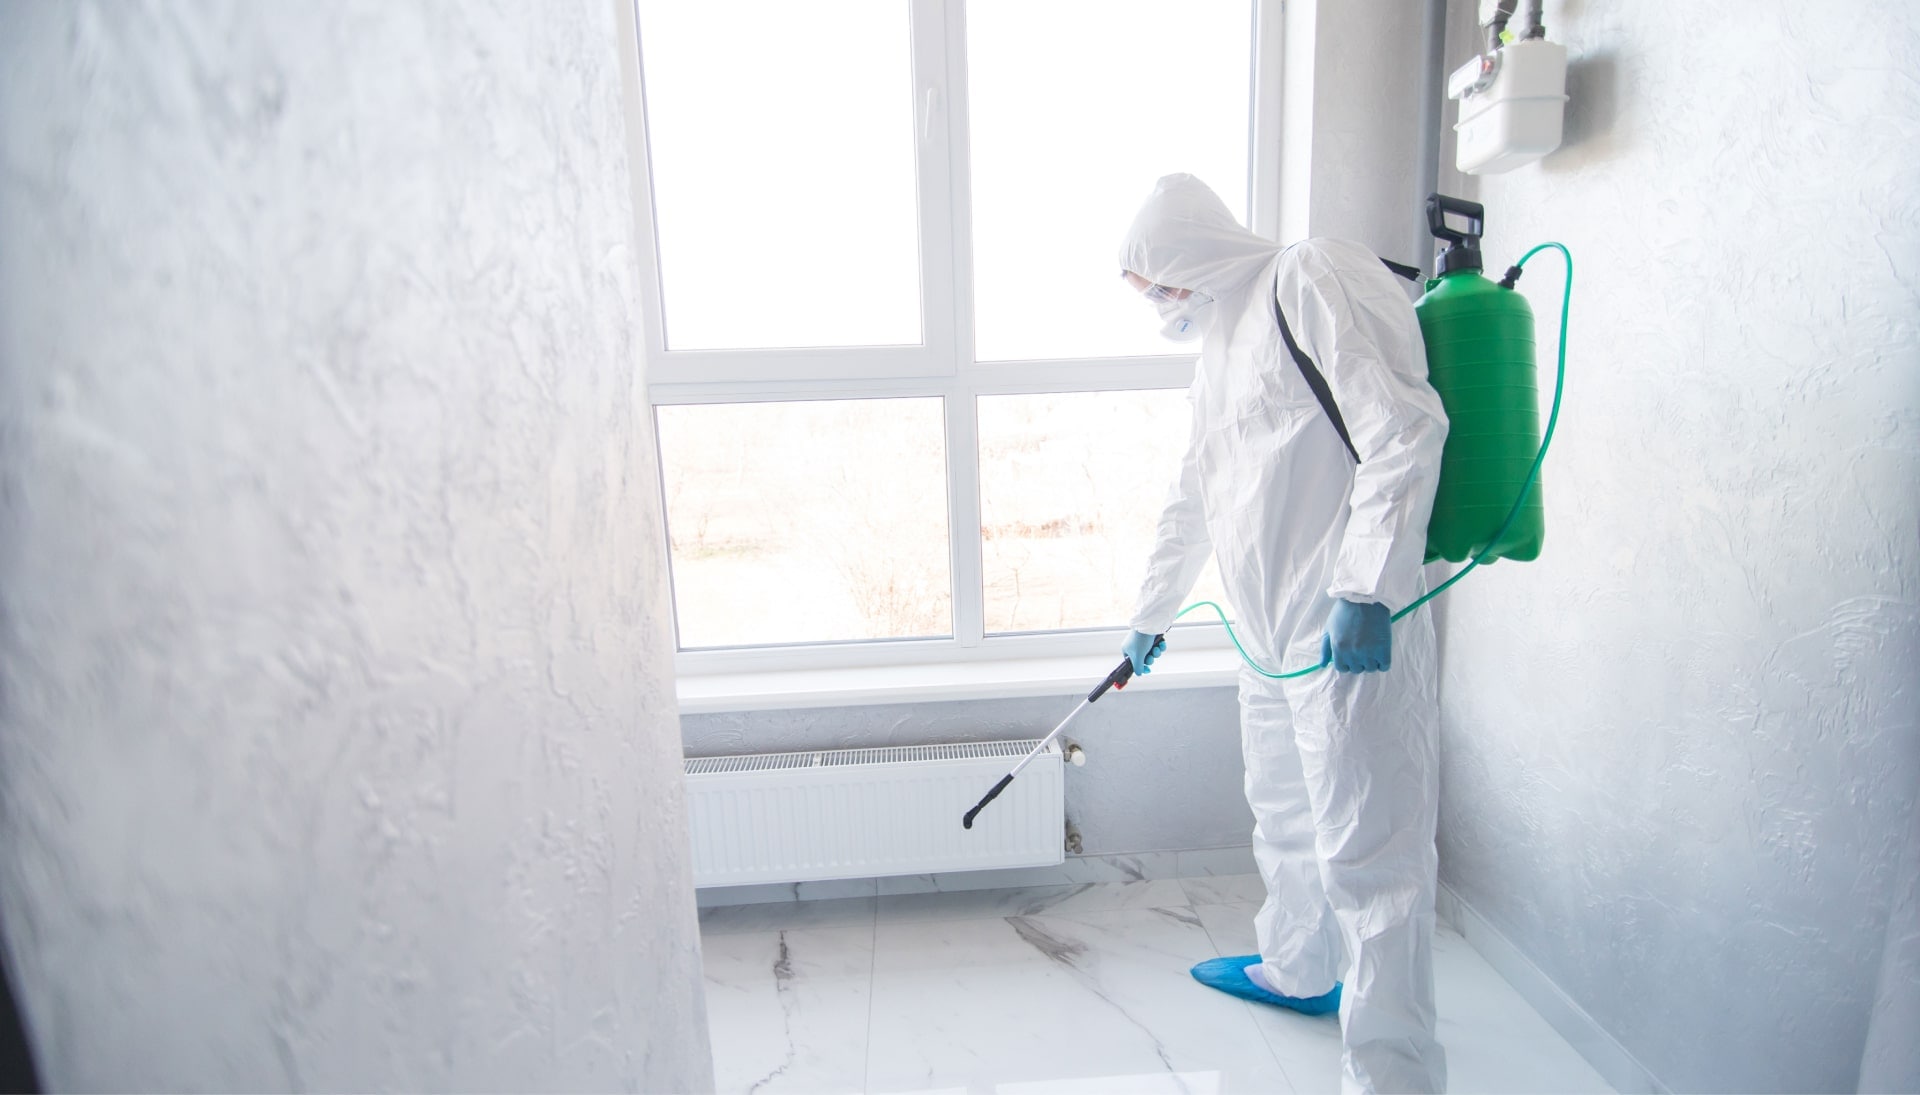 We provide the highest-quality mold inspection, testing, and removal services in the Albany, New York area.